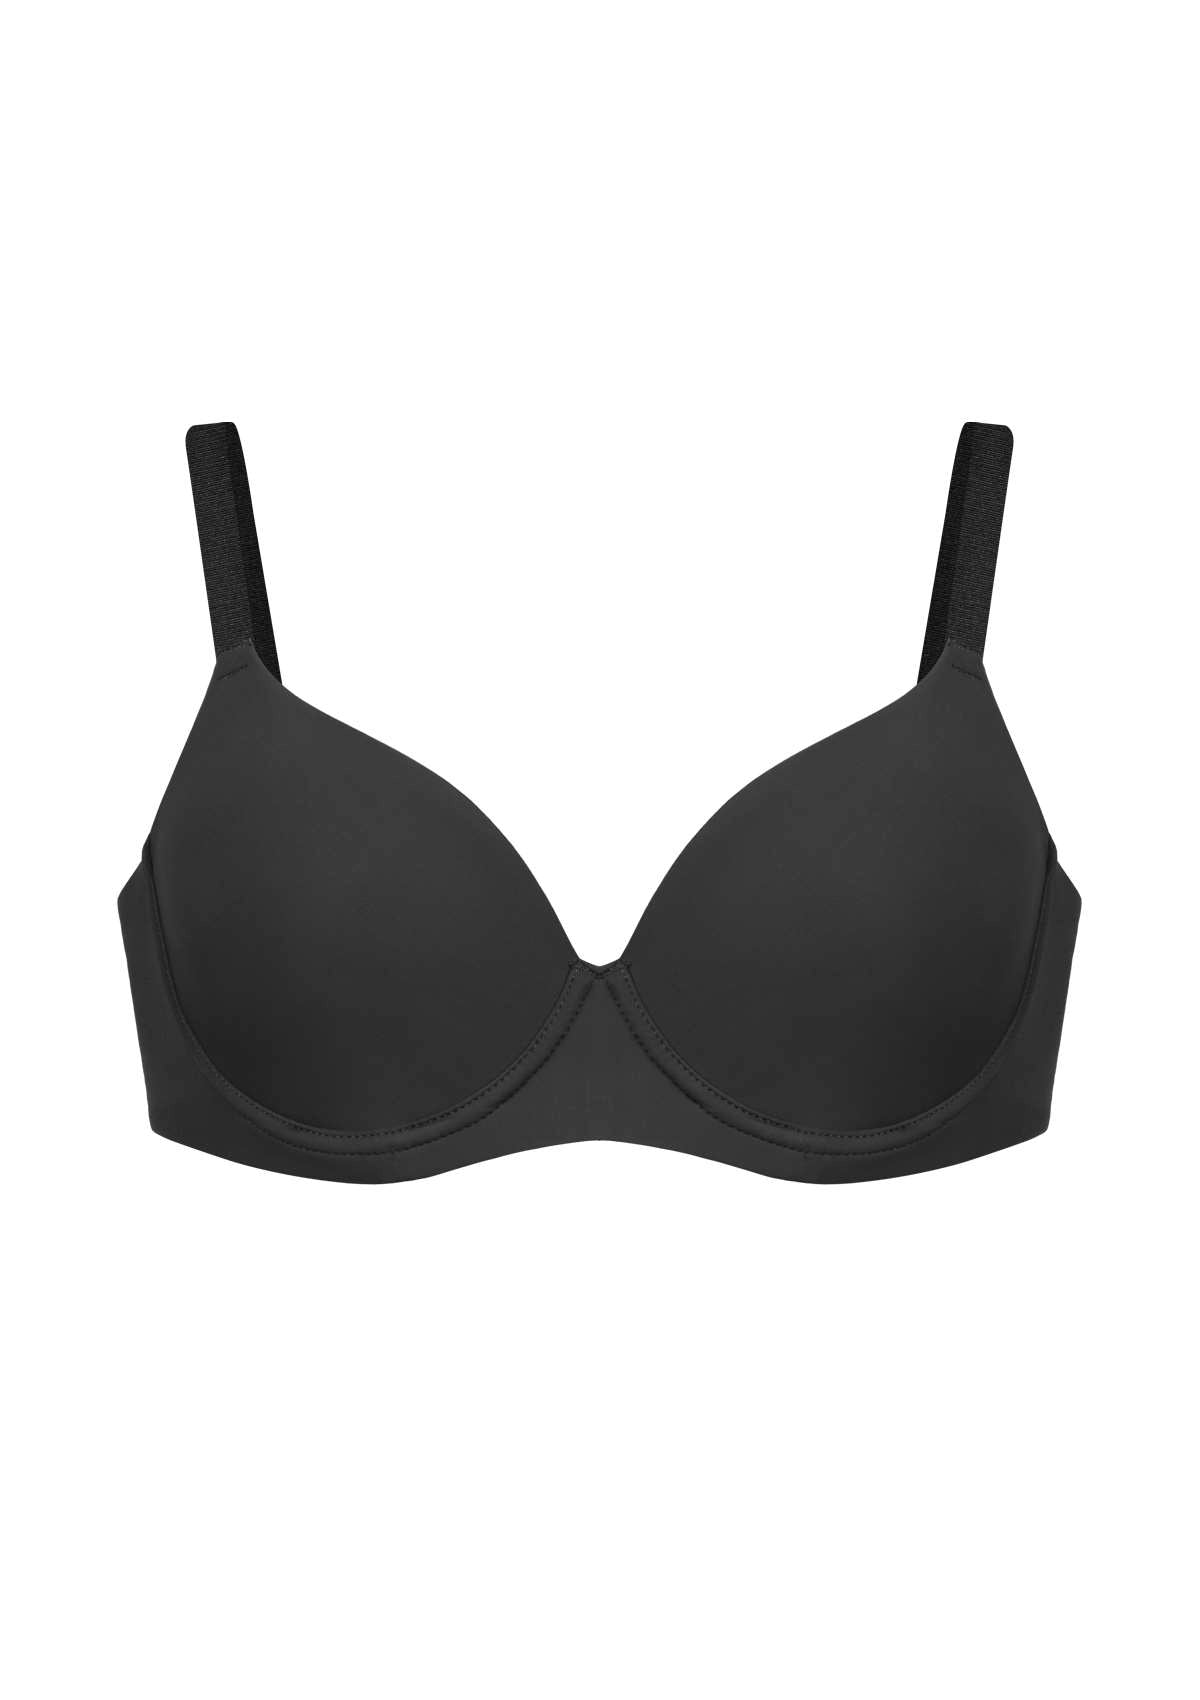 HSIA Gemma Smooth Padded T-shirt Everyday Bras - For Lift And Comfort - Black / 42 / DDD/F